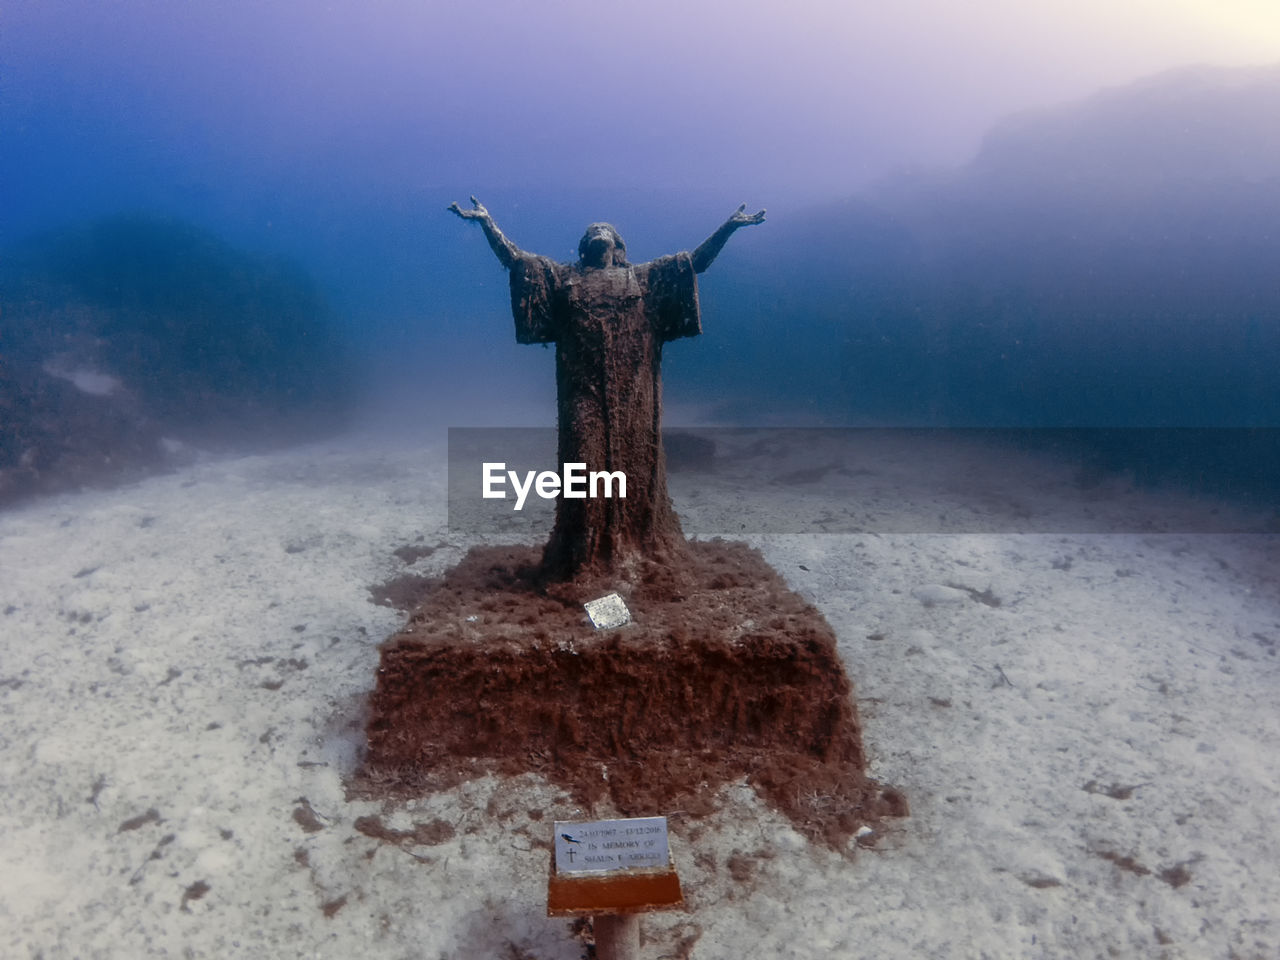 The statue of jesus christ near the wreck of the mv imperial eagle in malta